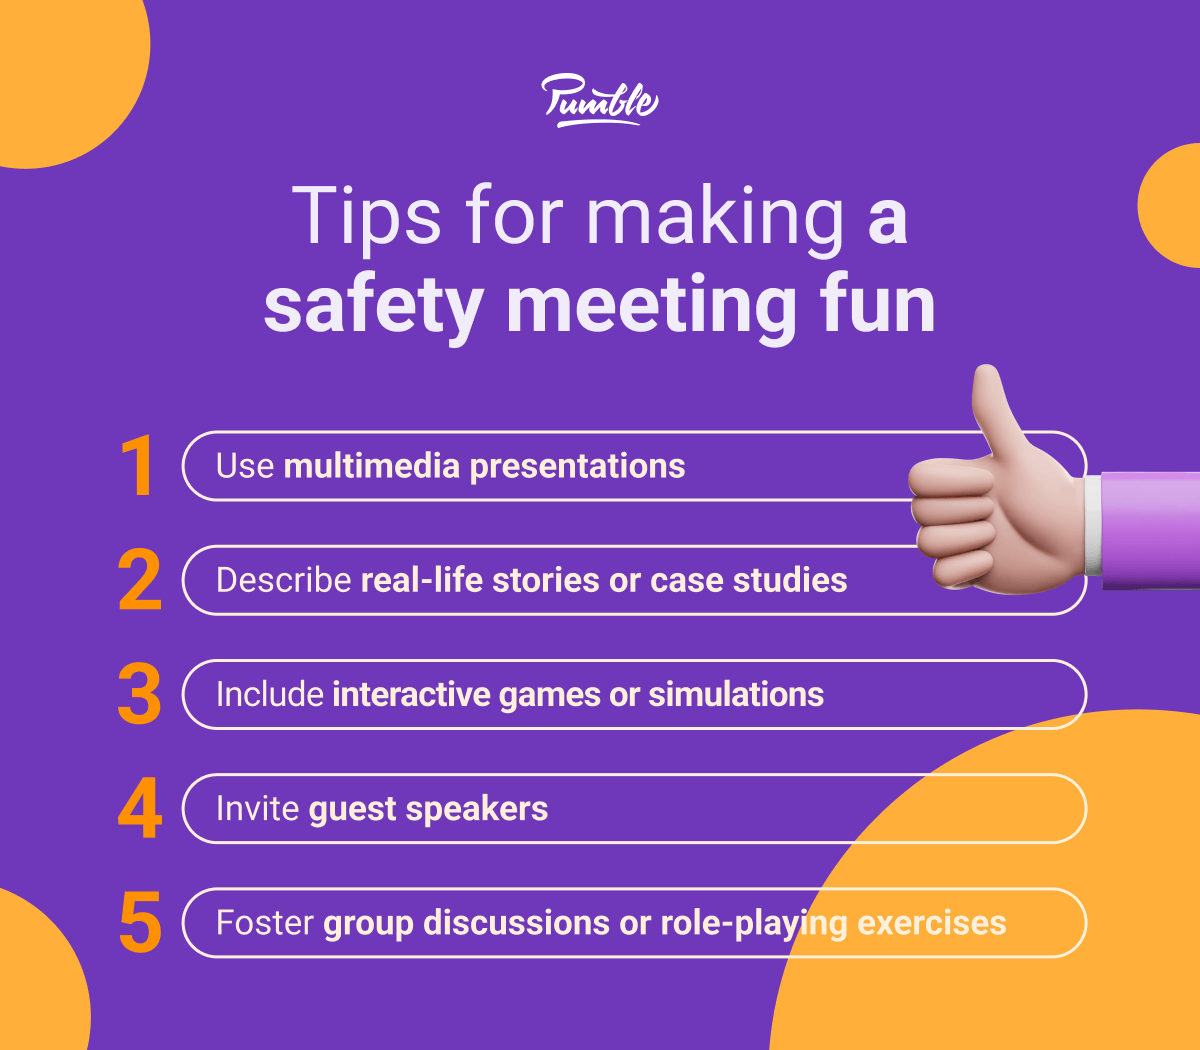 Safety Meeting Topics: Types, Benefits, and Expert Tips